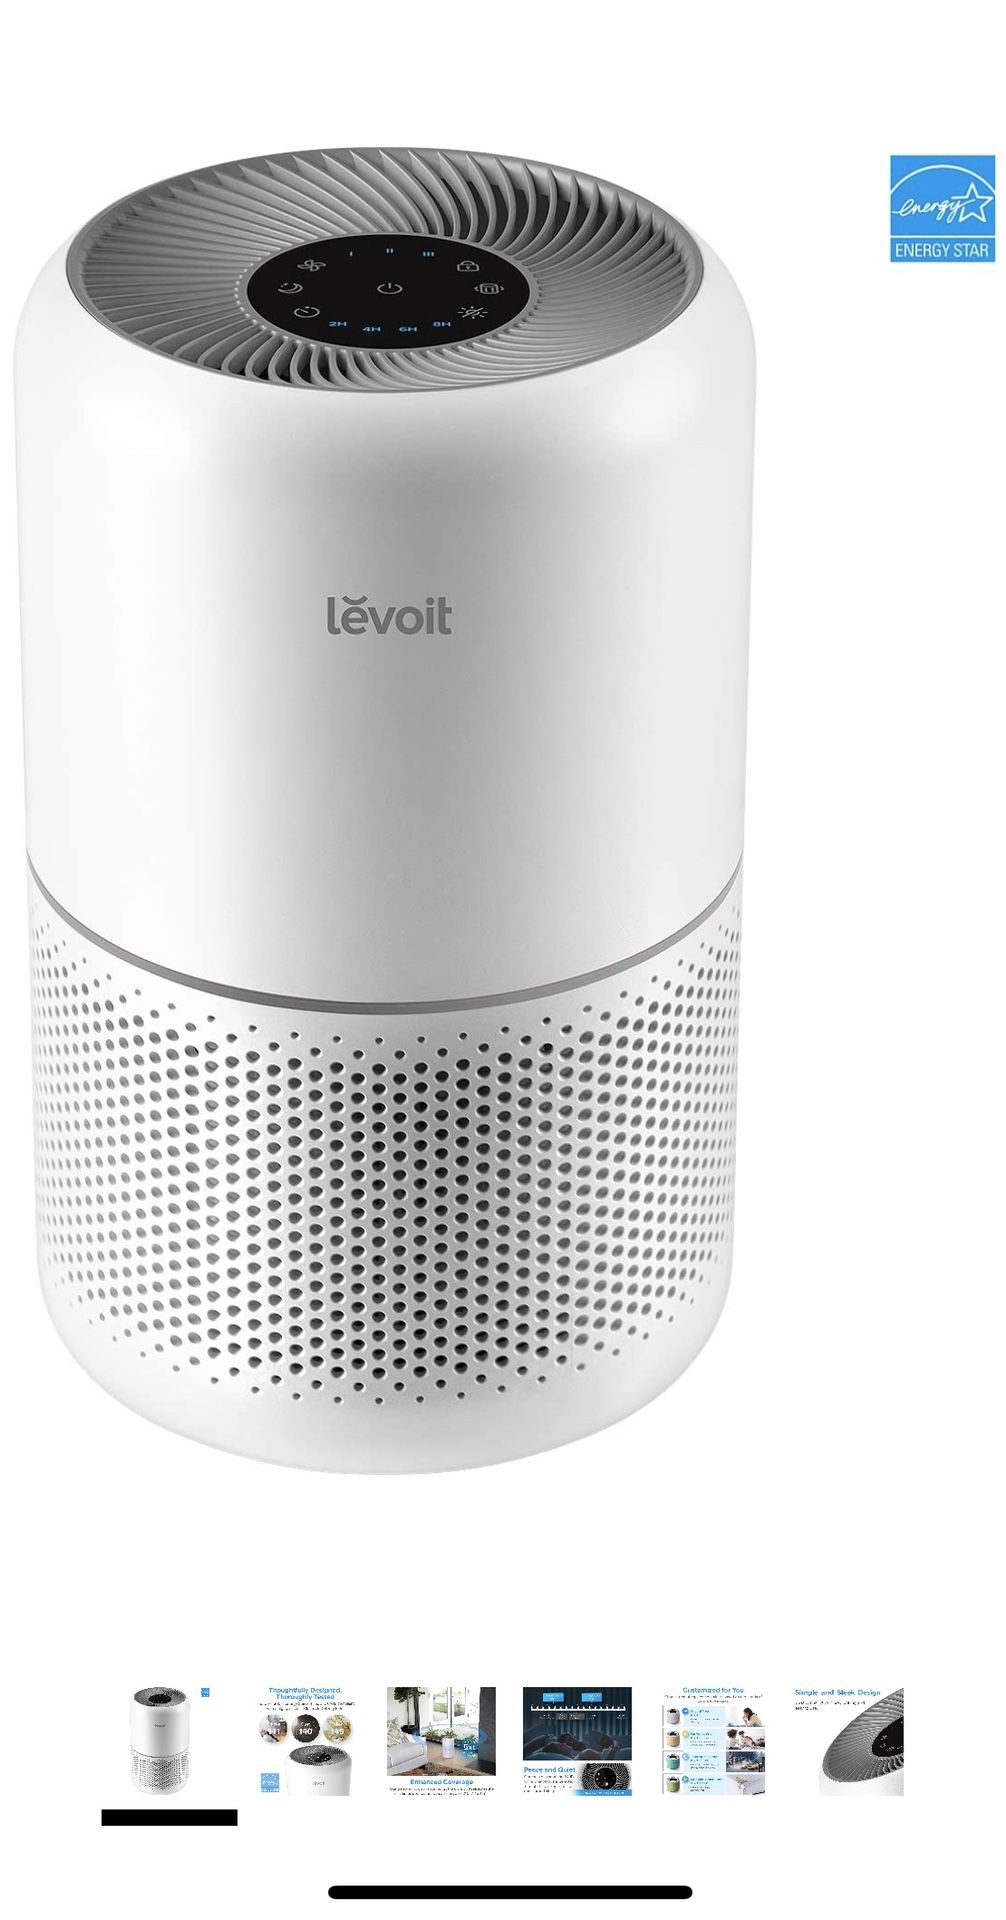 LEVOIT Air Purifier H13 True HEPA Air Purifiers for Home Allergies and Pets Hair 24db Quiet Air Cleaner, Remove 99.97% Dust Smoke Odor Dander Pollen